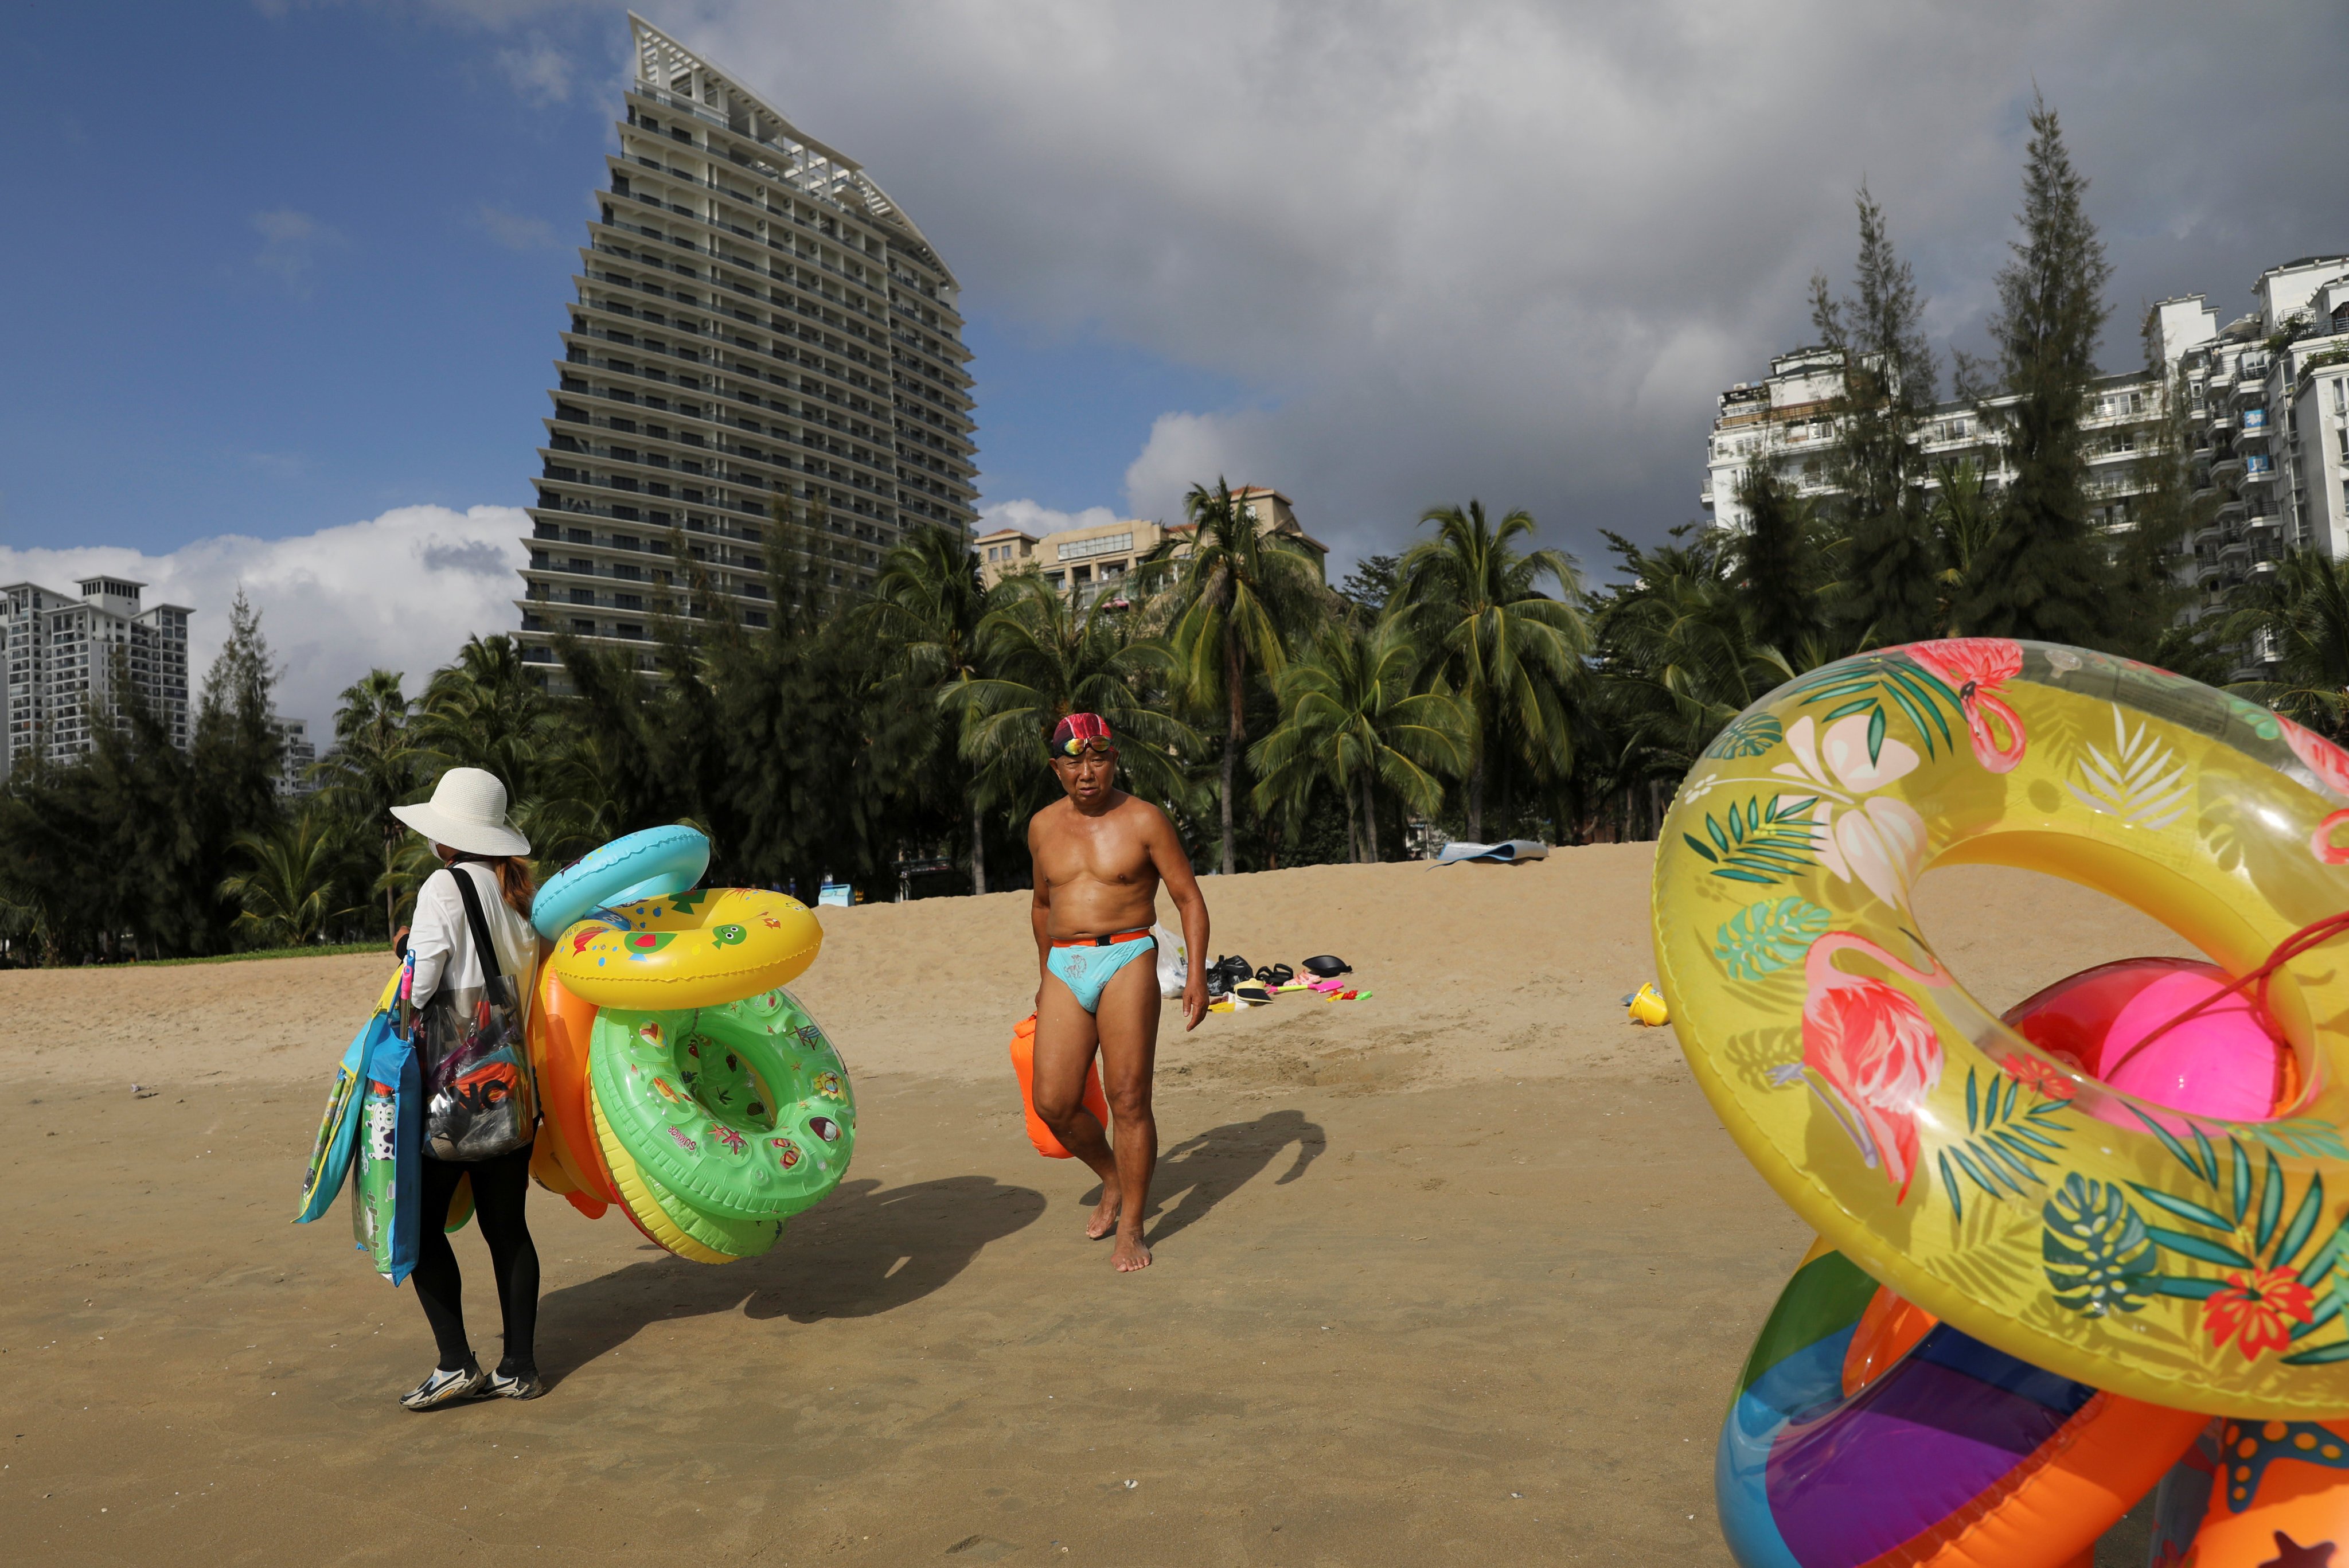 A vendor selling swimming accessories on Sanya Bay beach in Hainan province, China. Photo: Reuters